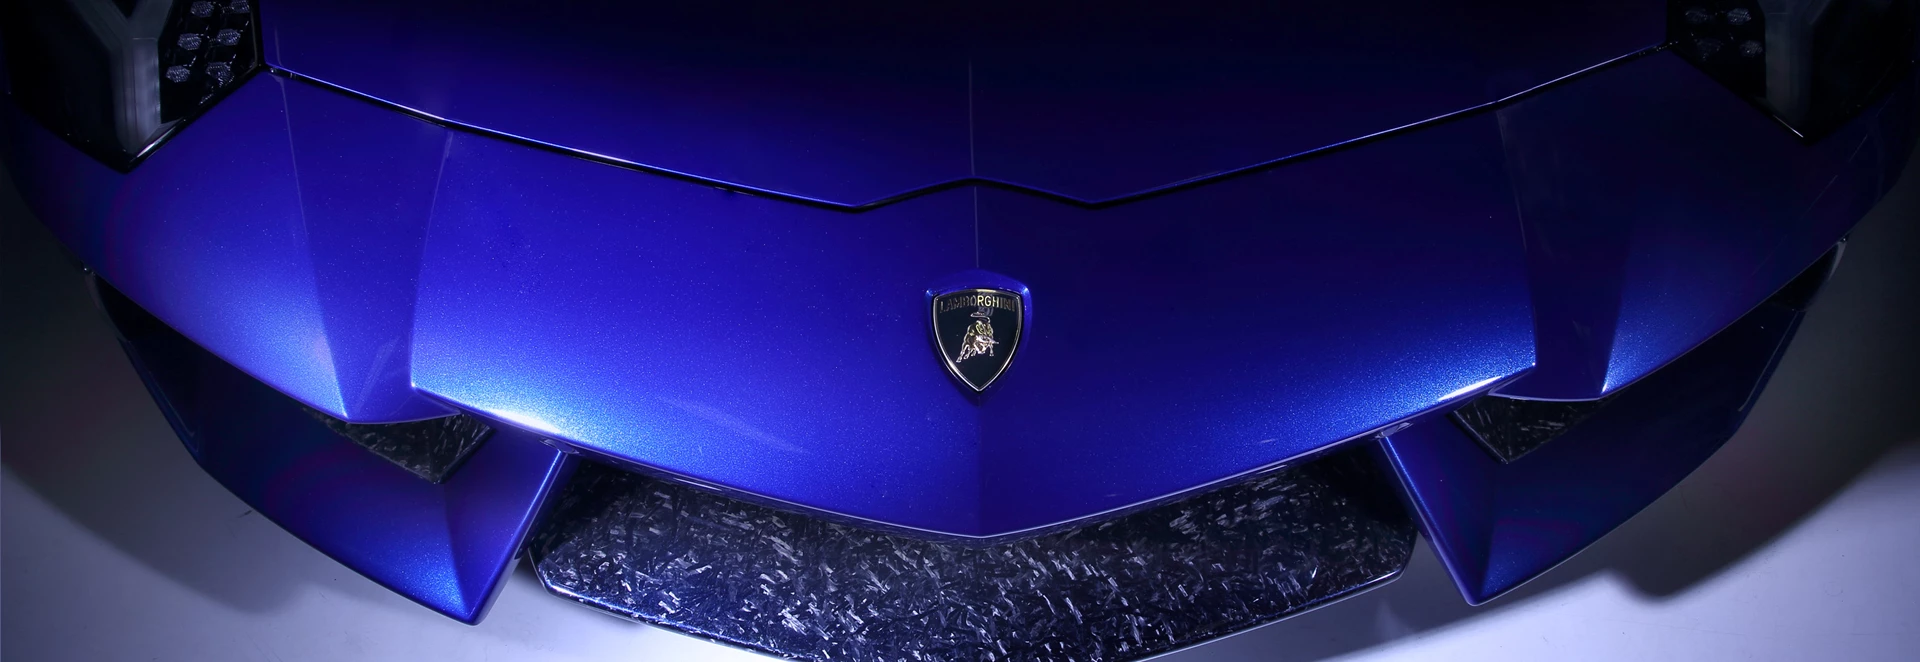 Lamborghini planning to add new four-seater supercar to its range 